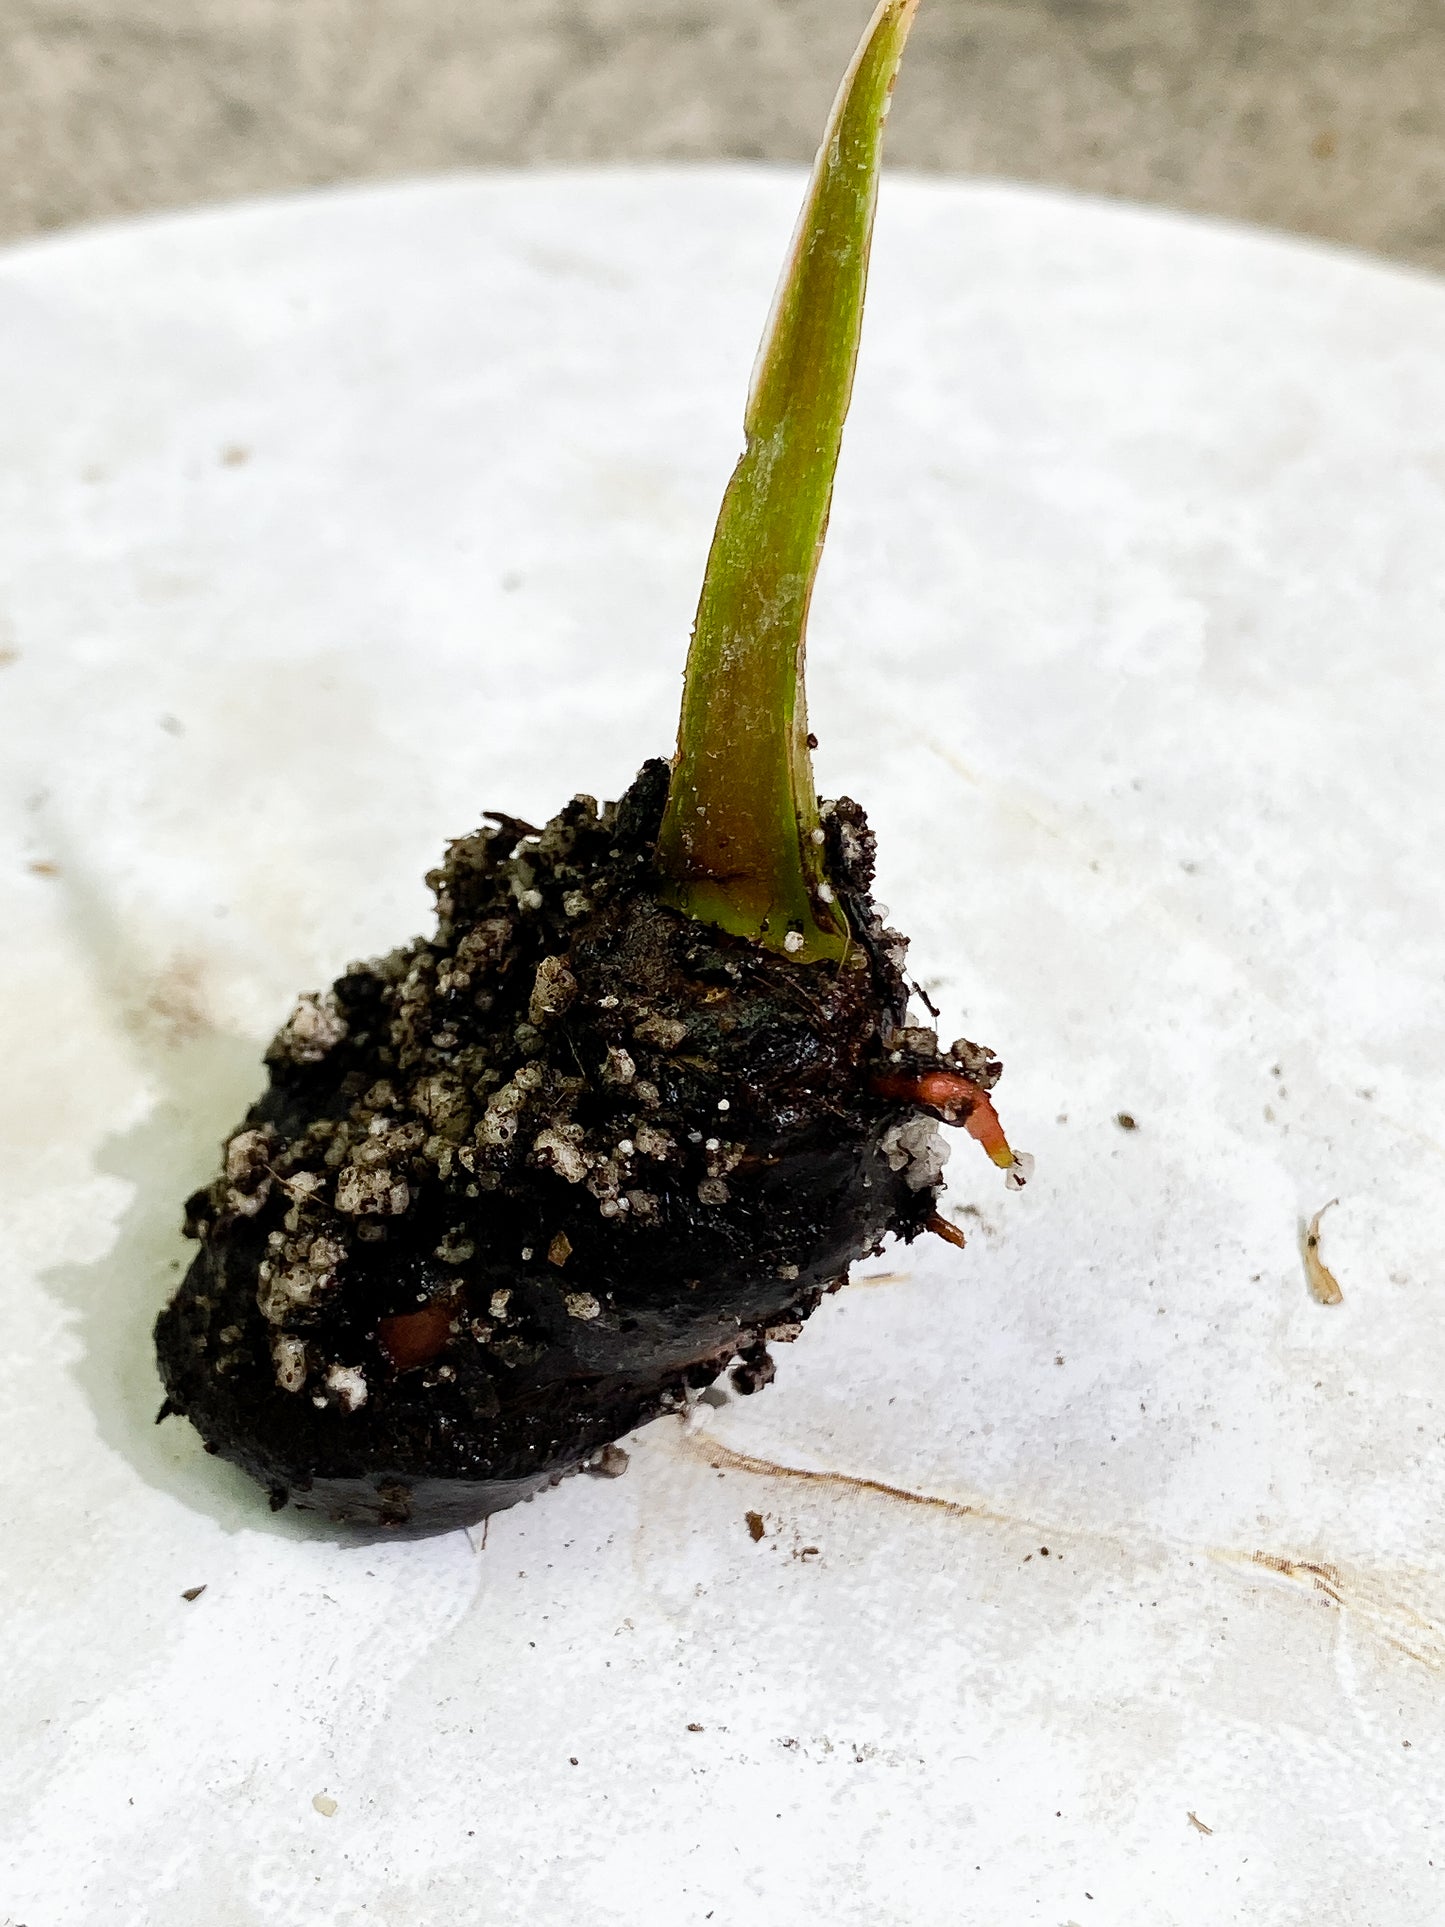 Combo sprout: 1 Philodendron Plowmanii Rooting sprout and 1 Rooting paraiso verde sprout